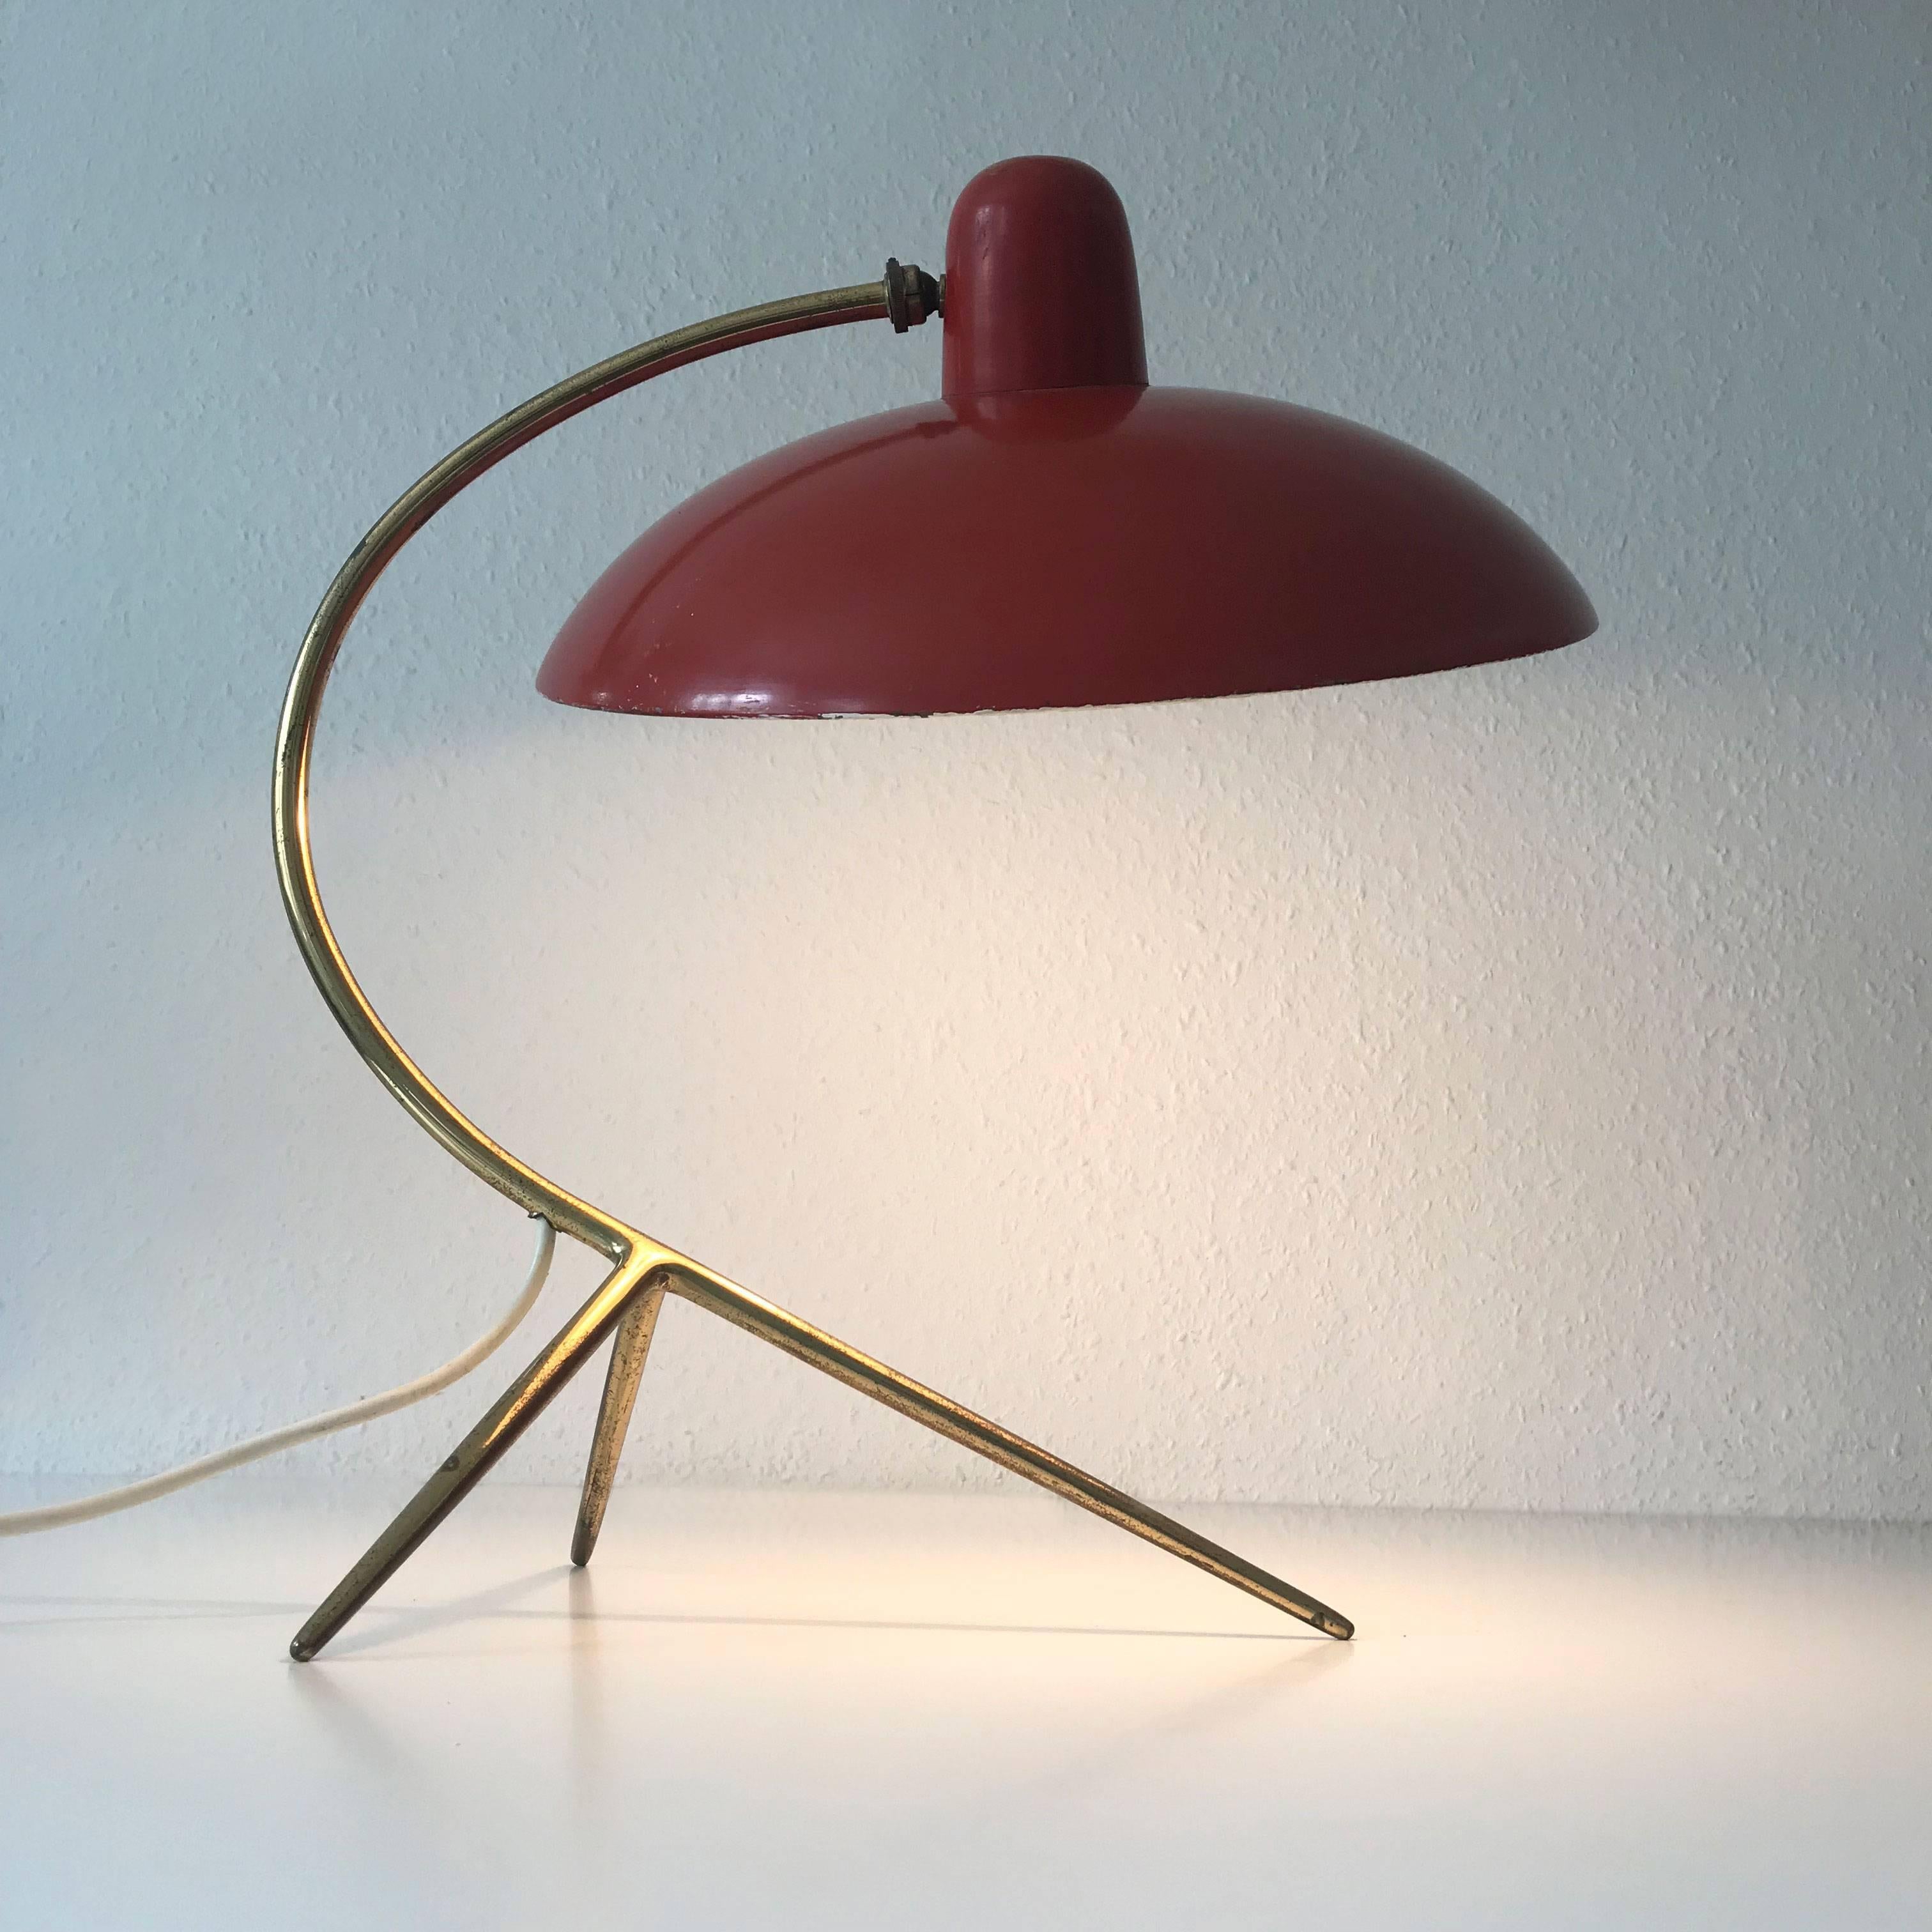 Exceptional Italian Mid-Century Modern Table Lamp, 1950s 6